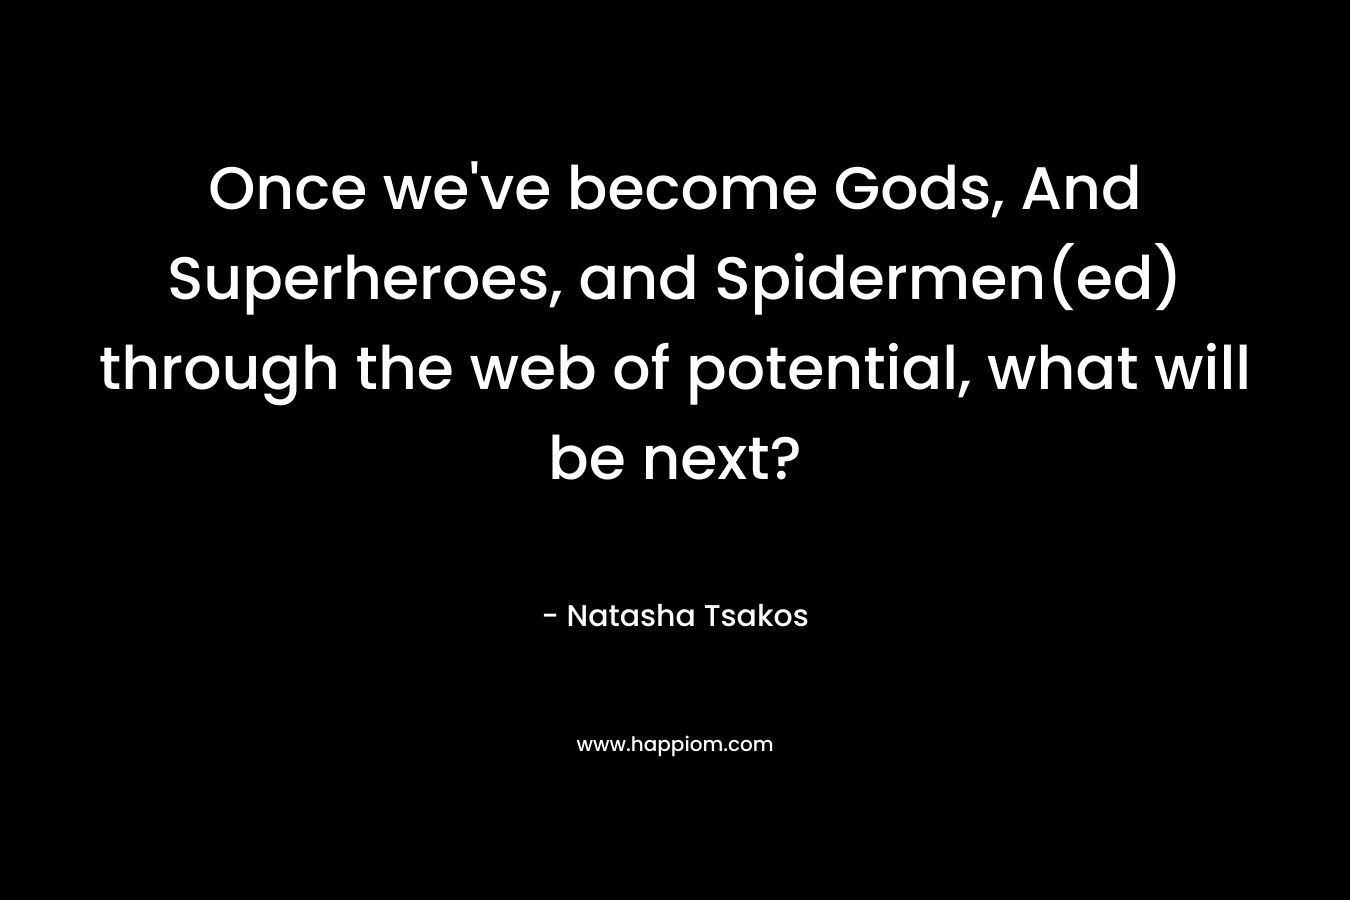 Once we’ve become Gods, And Superheroes, and Spidermen(ed) through the web of potential, what will be next? – Natasha Tsakos